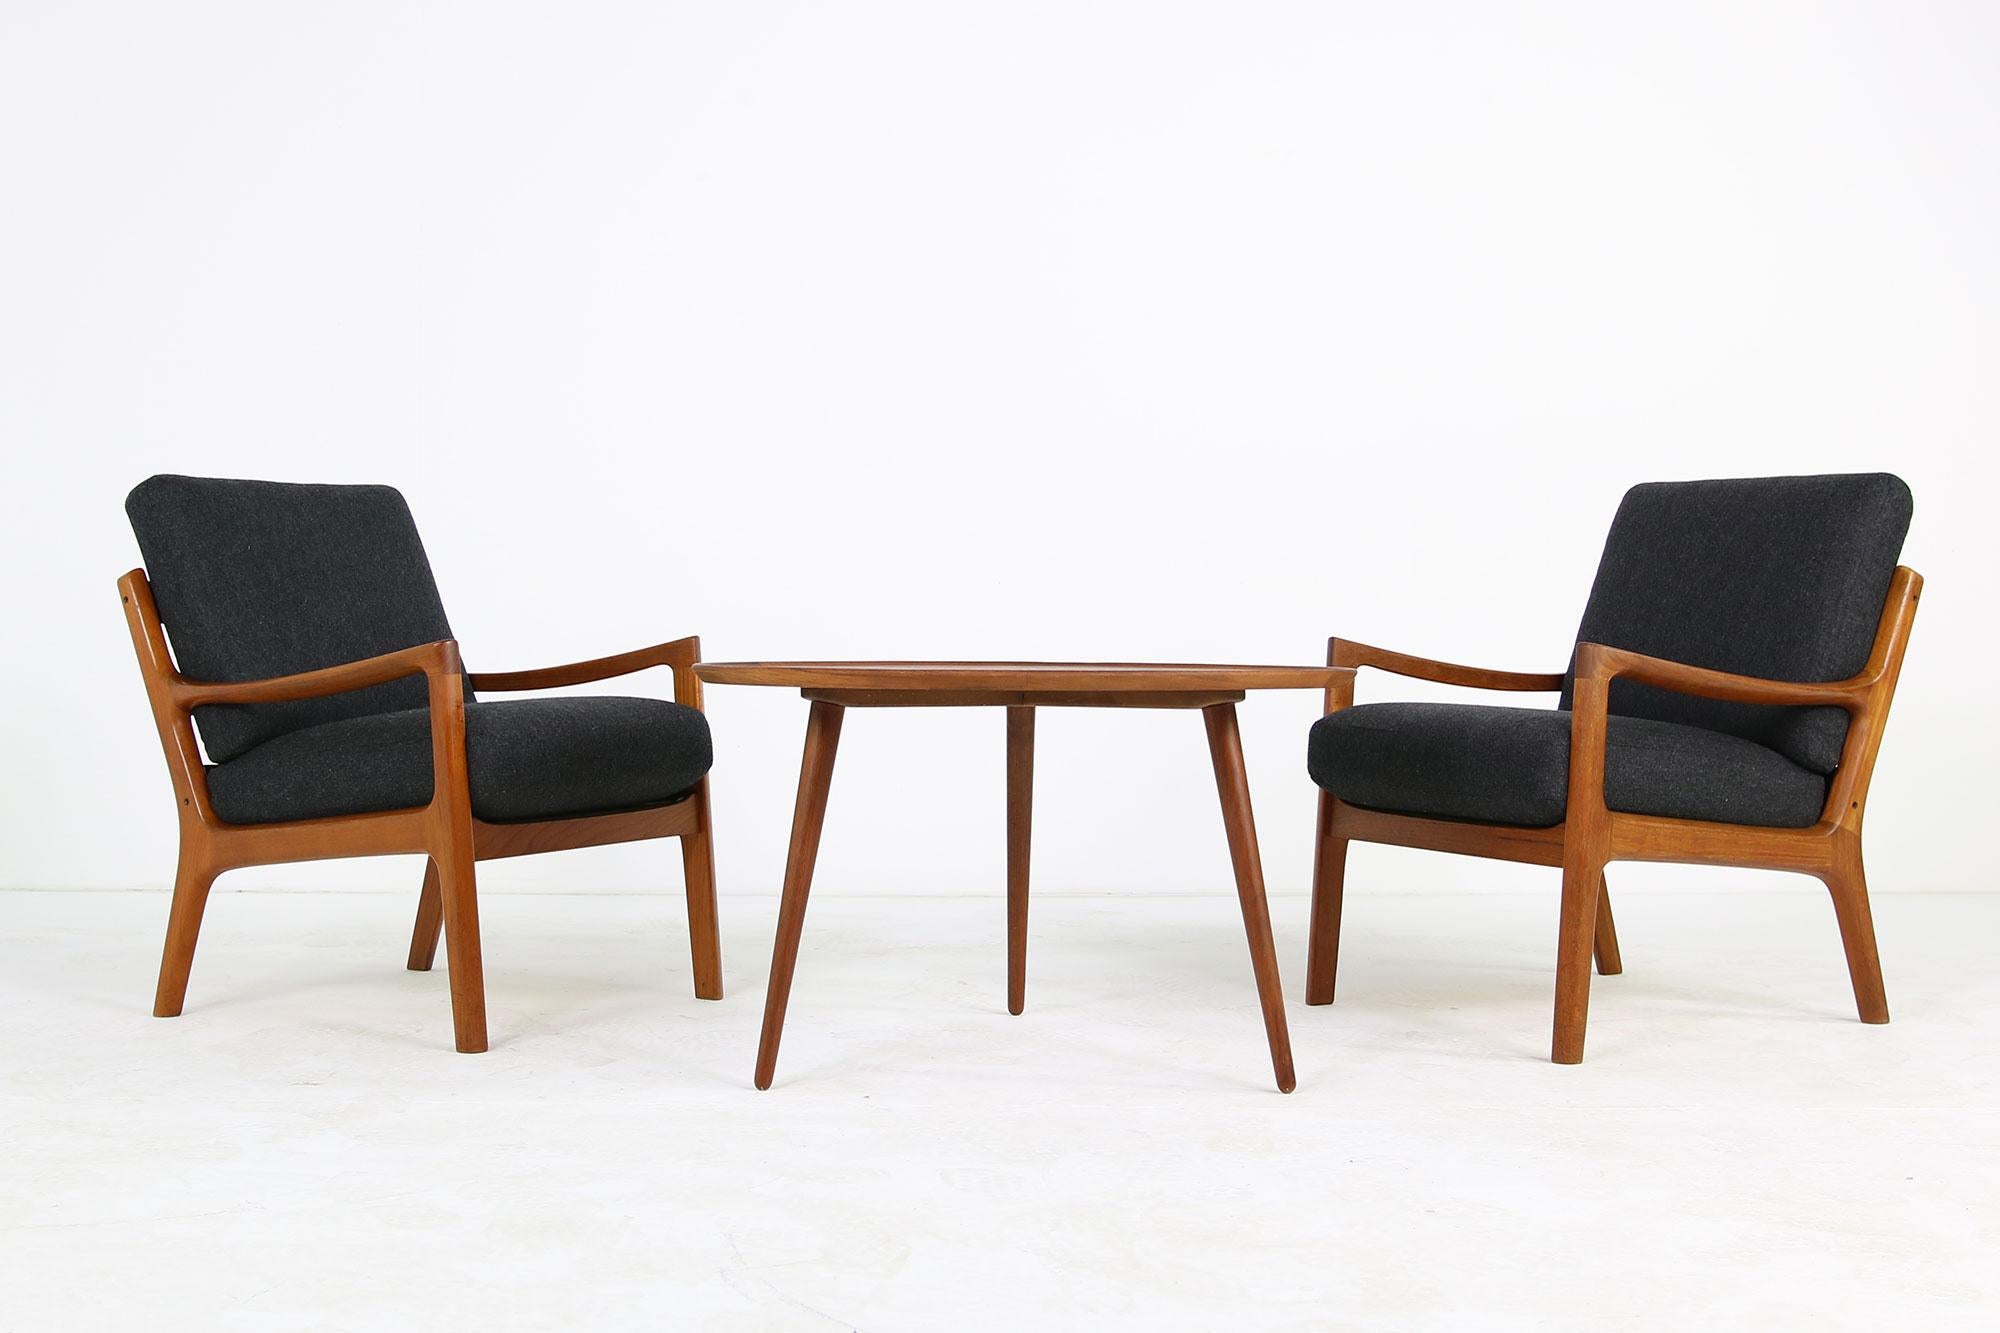 Pair of Danish 1960s Teak Lounge Easy Chairs by Ole Wanscher CADO, Denmark 1